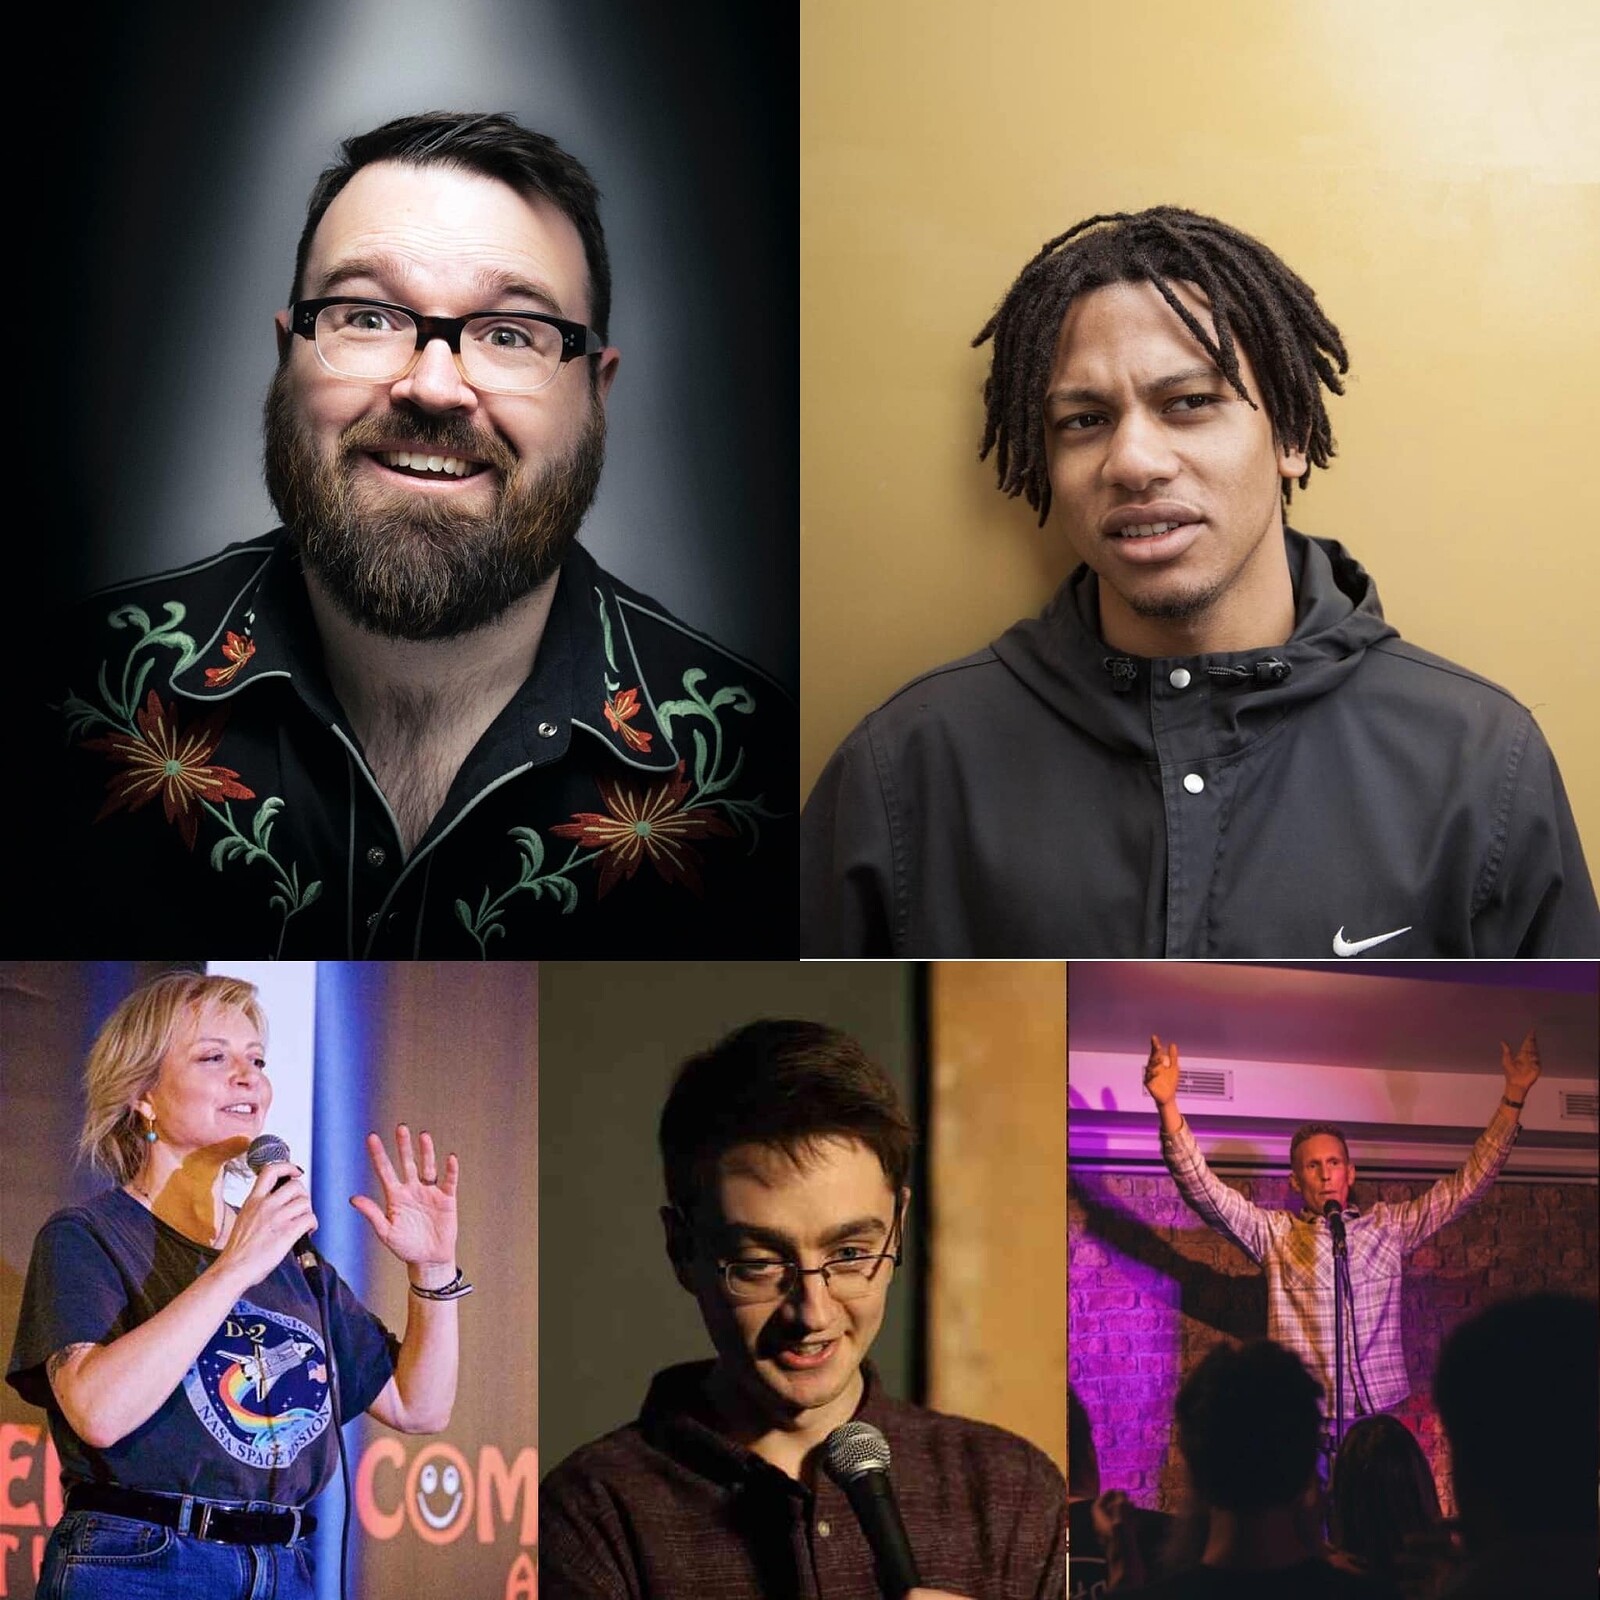 Bristol Comedy Den: The Wednesday Show at sidney and eden